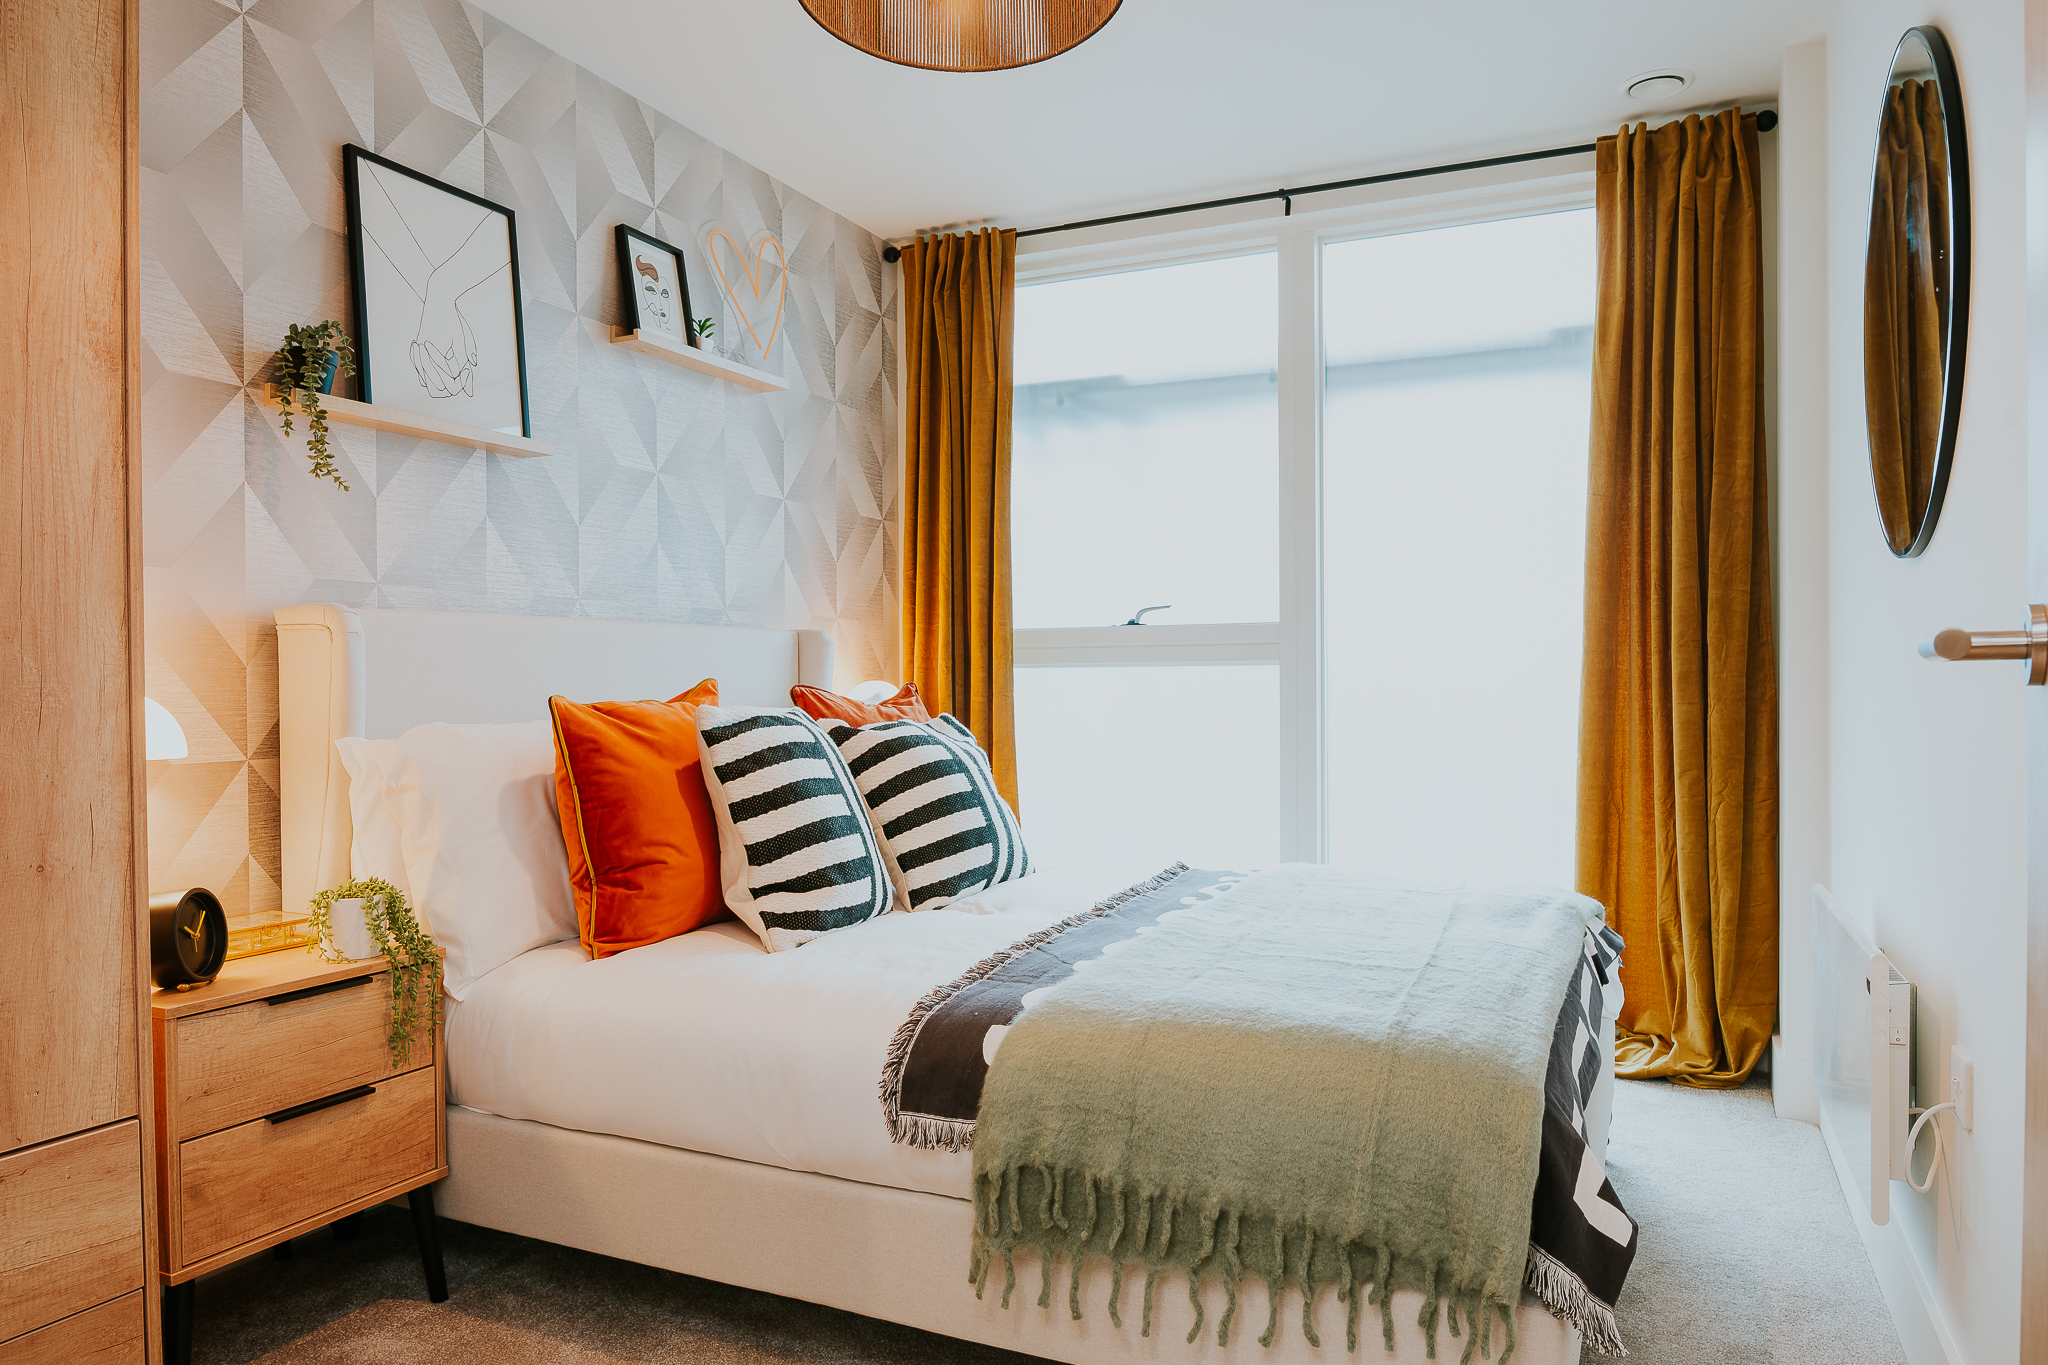 cosy bedroom with a double bed, orange curtains and pillows